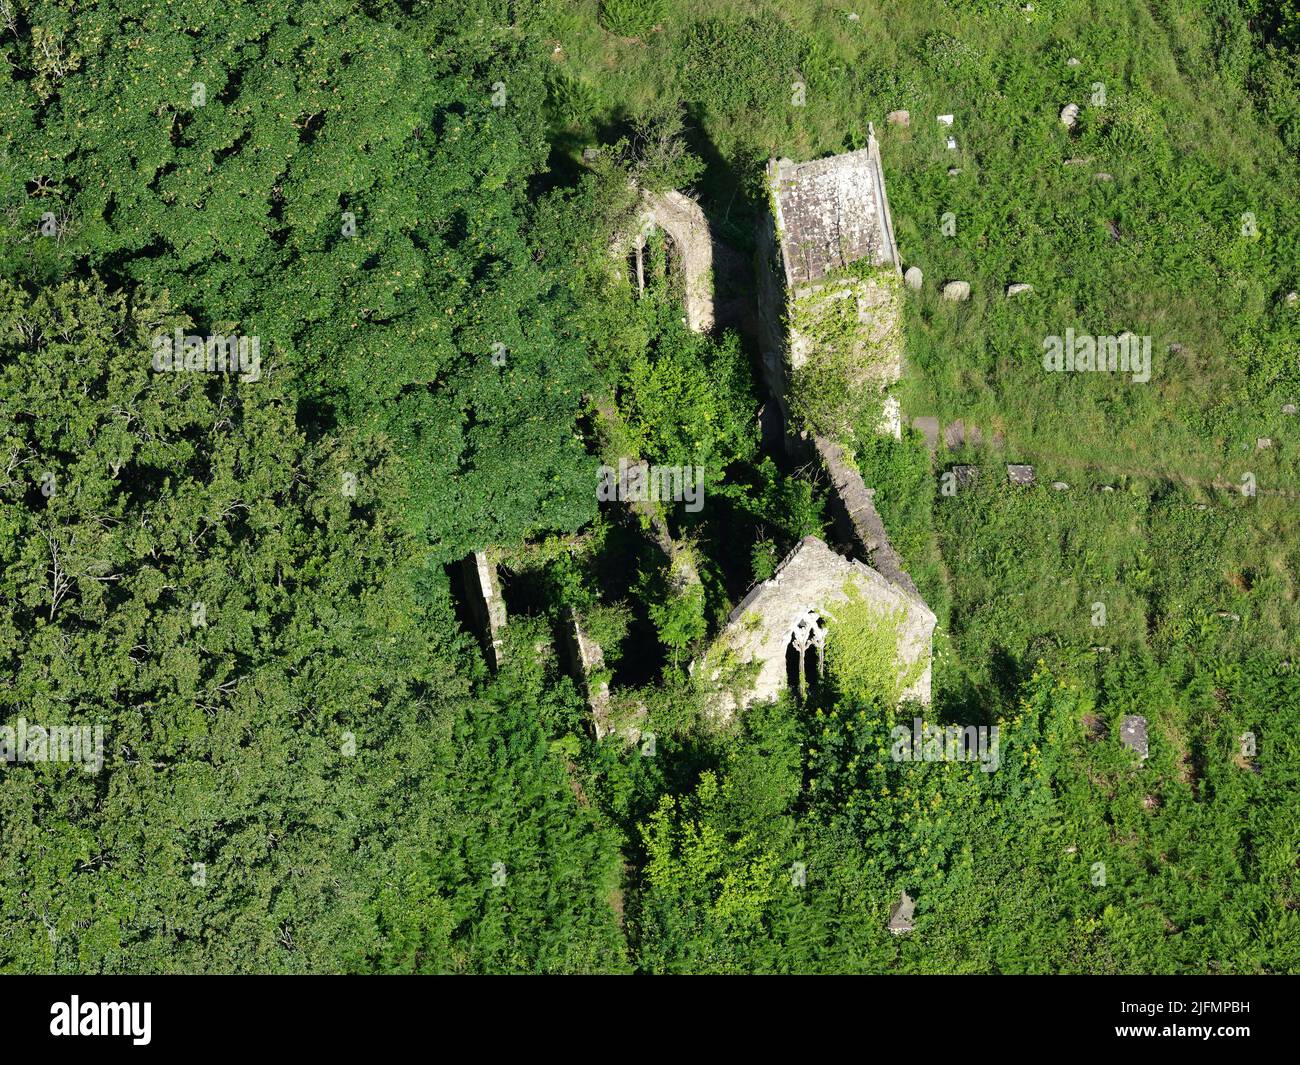 AERIAL VIEW. Abandoned church of St Mary and cemetery overgrown by vegetation. Tintern, Monmouthshire, Wales, United Kingdom. Stock Photo